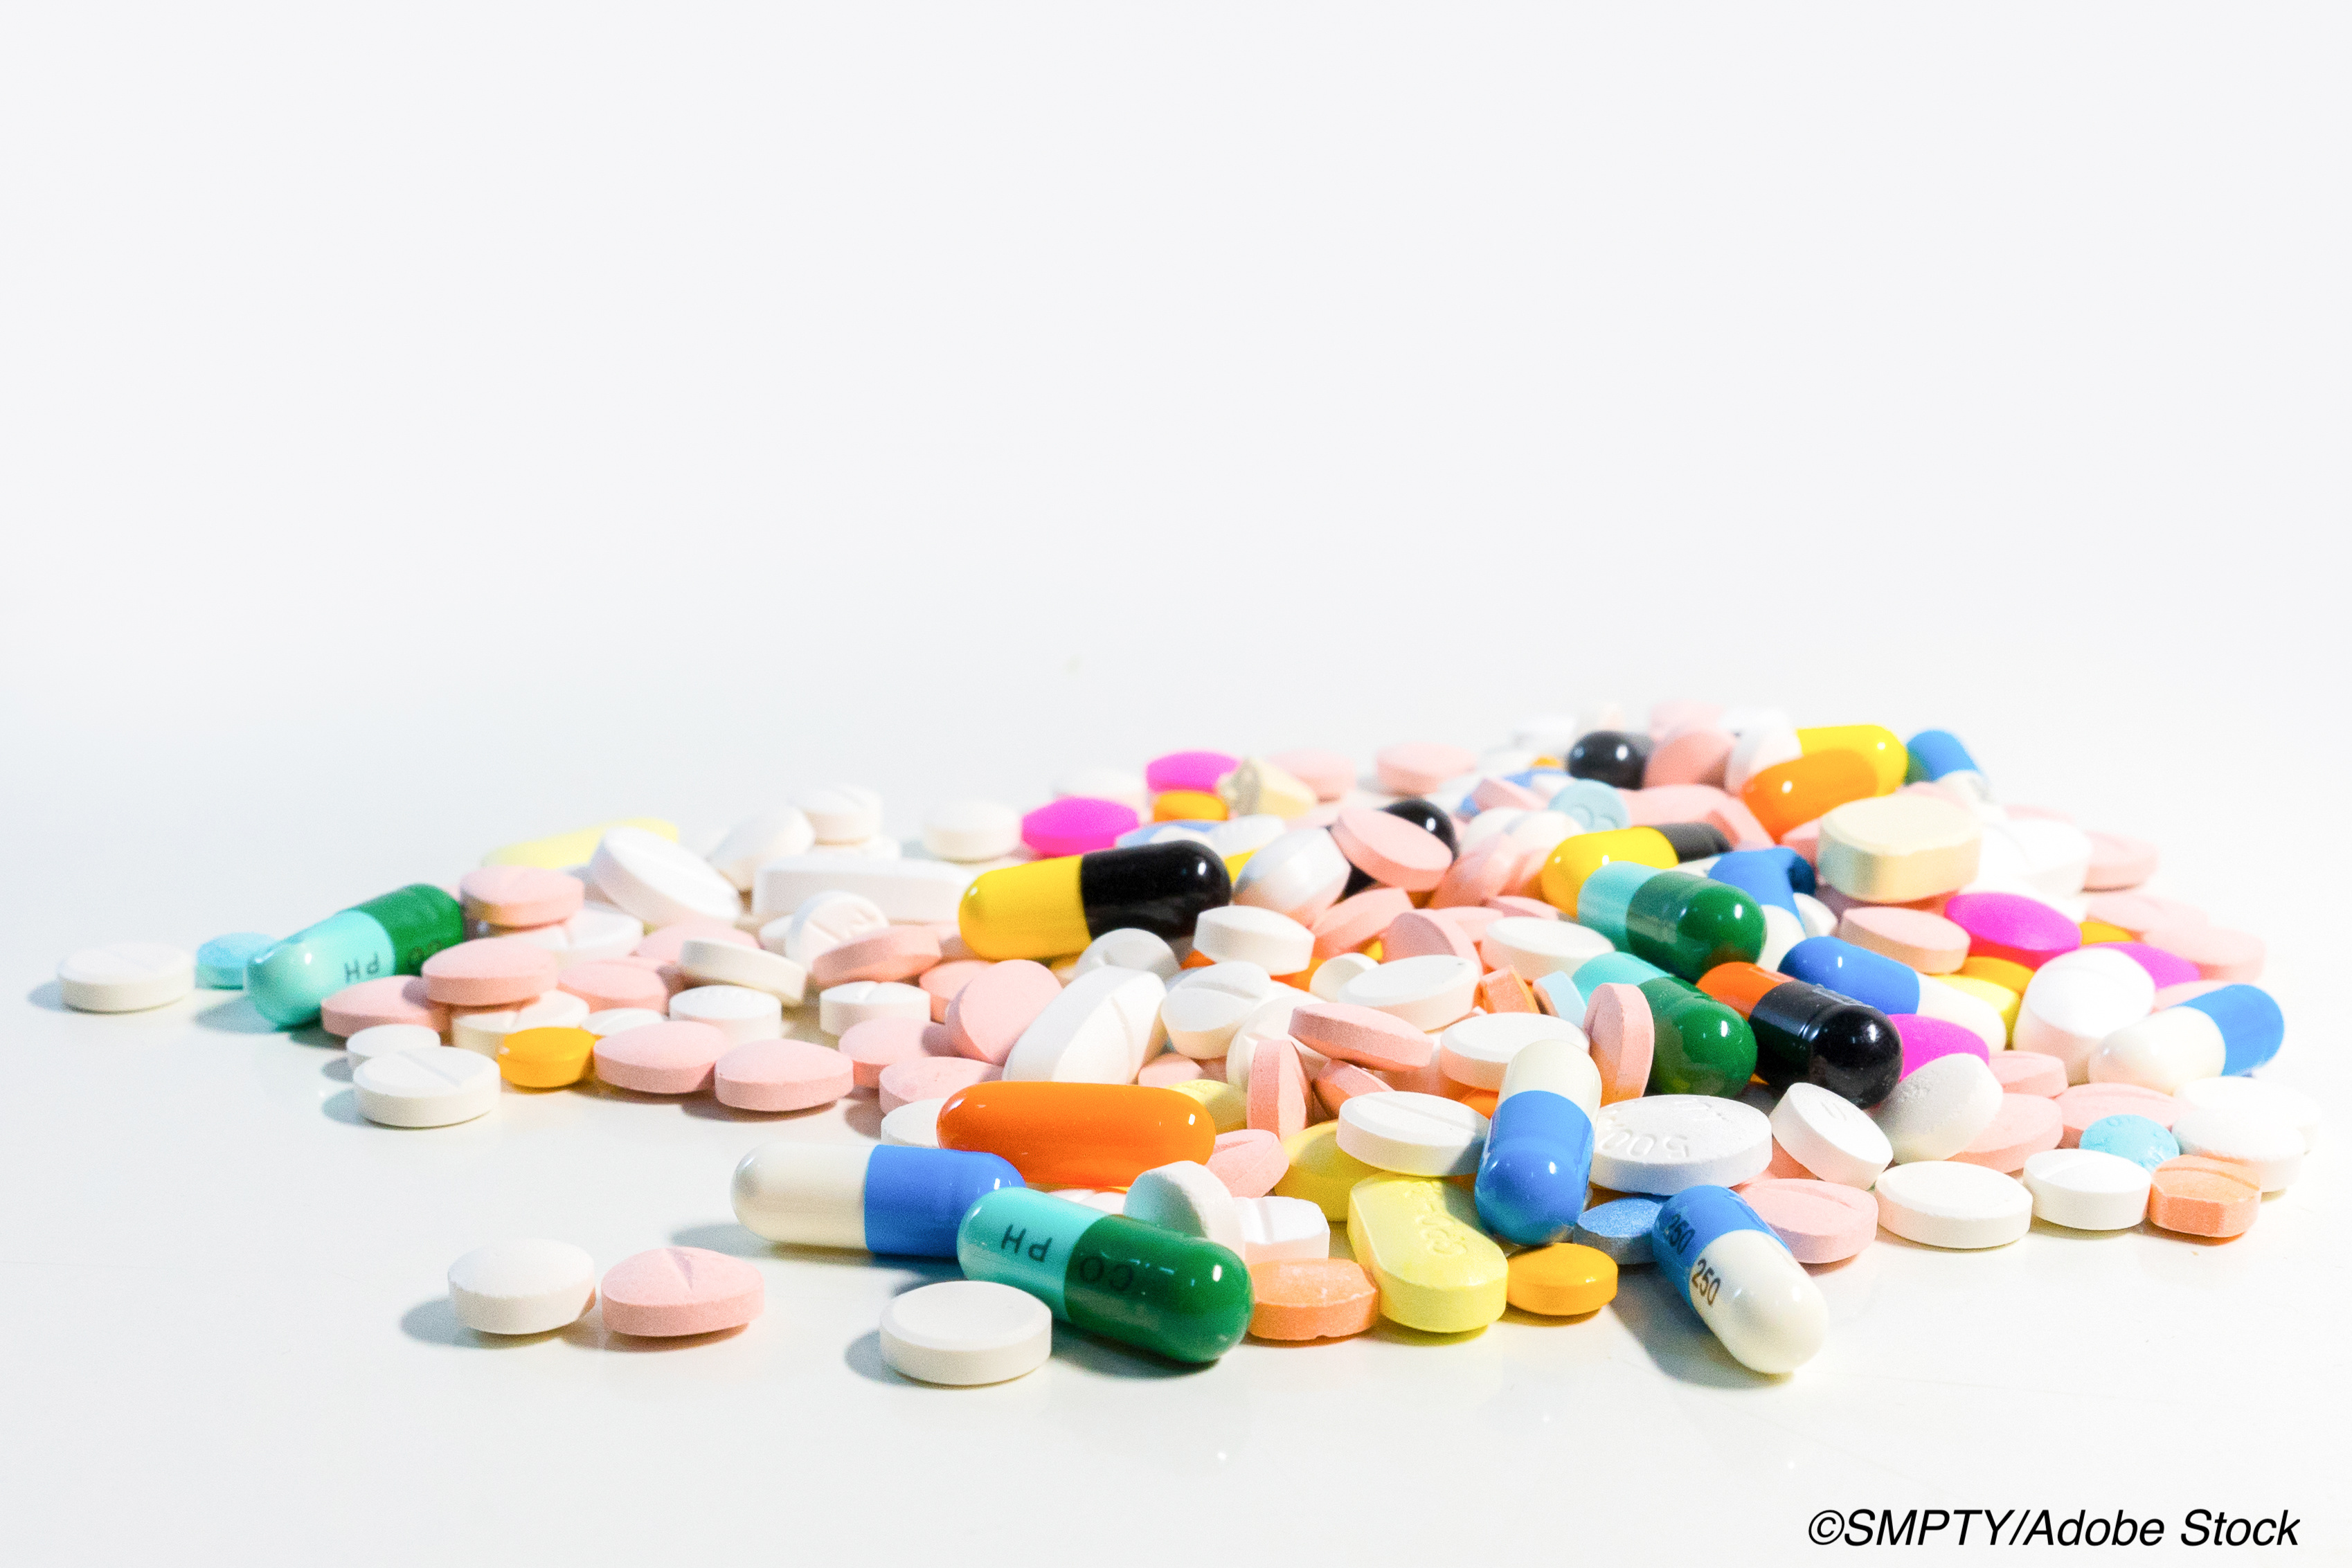 Polypharmacy Linked to High-Distress Symptoms in Children with Severe Neurologic Impairment